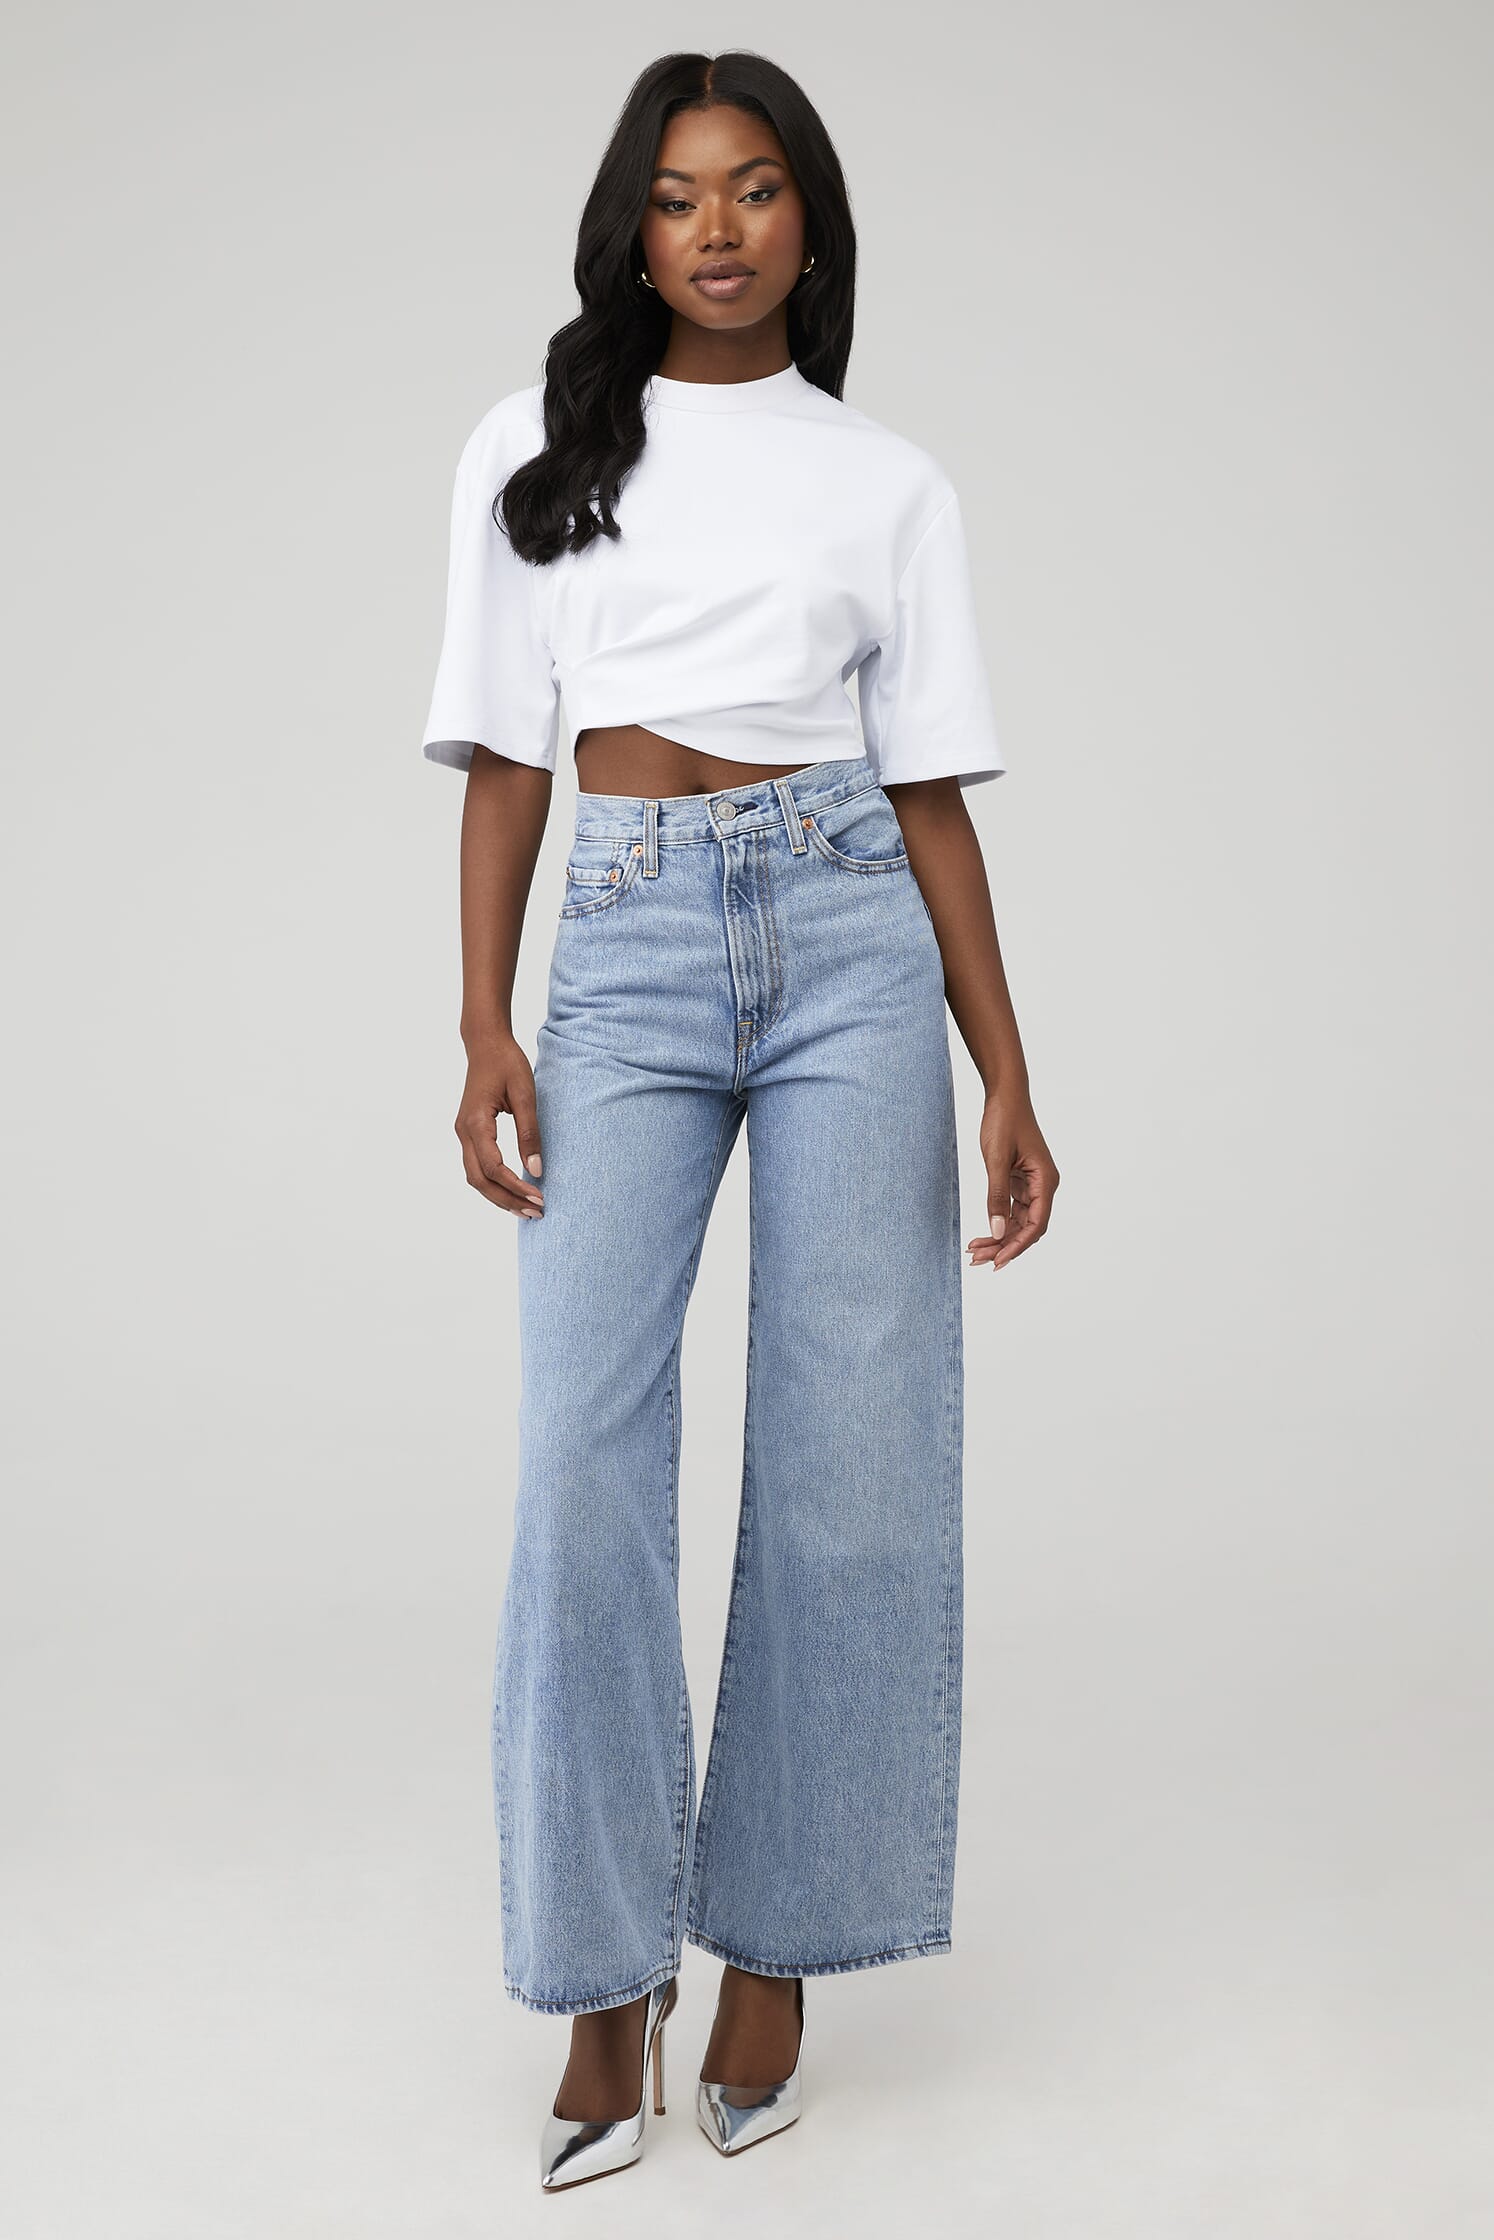 LEVI'S, Ribcage Wide Leg in Far And Wide